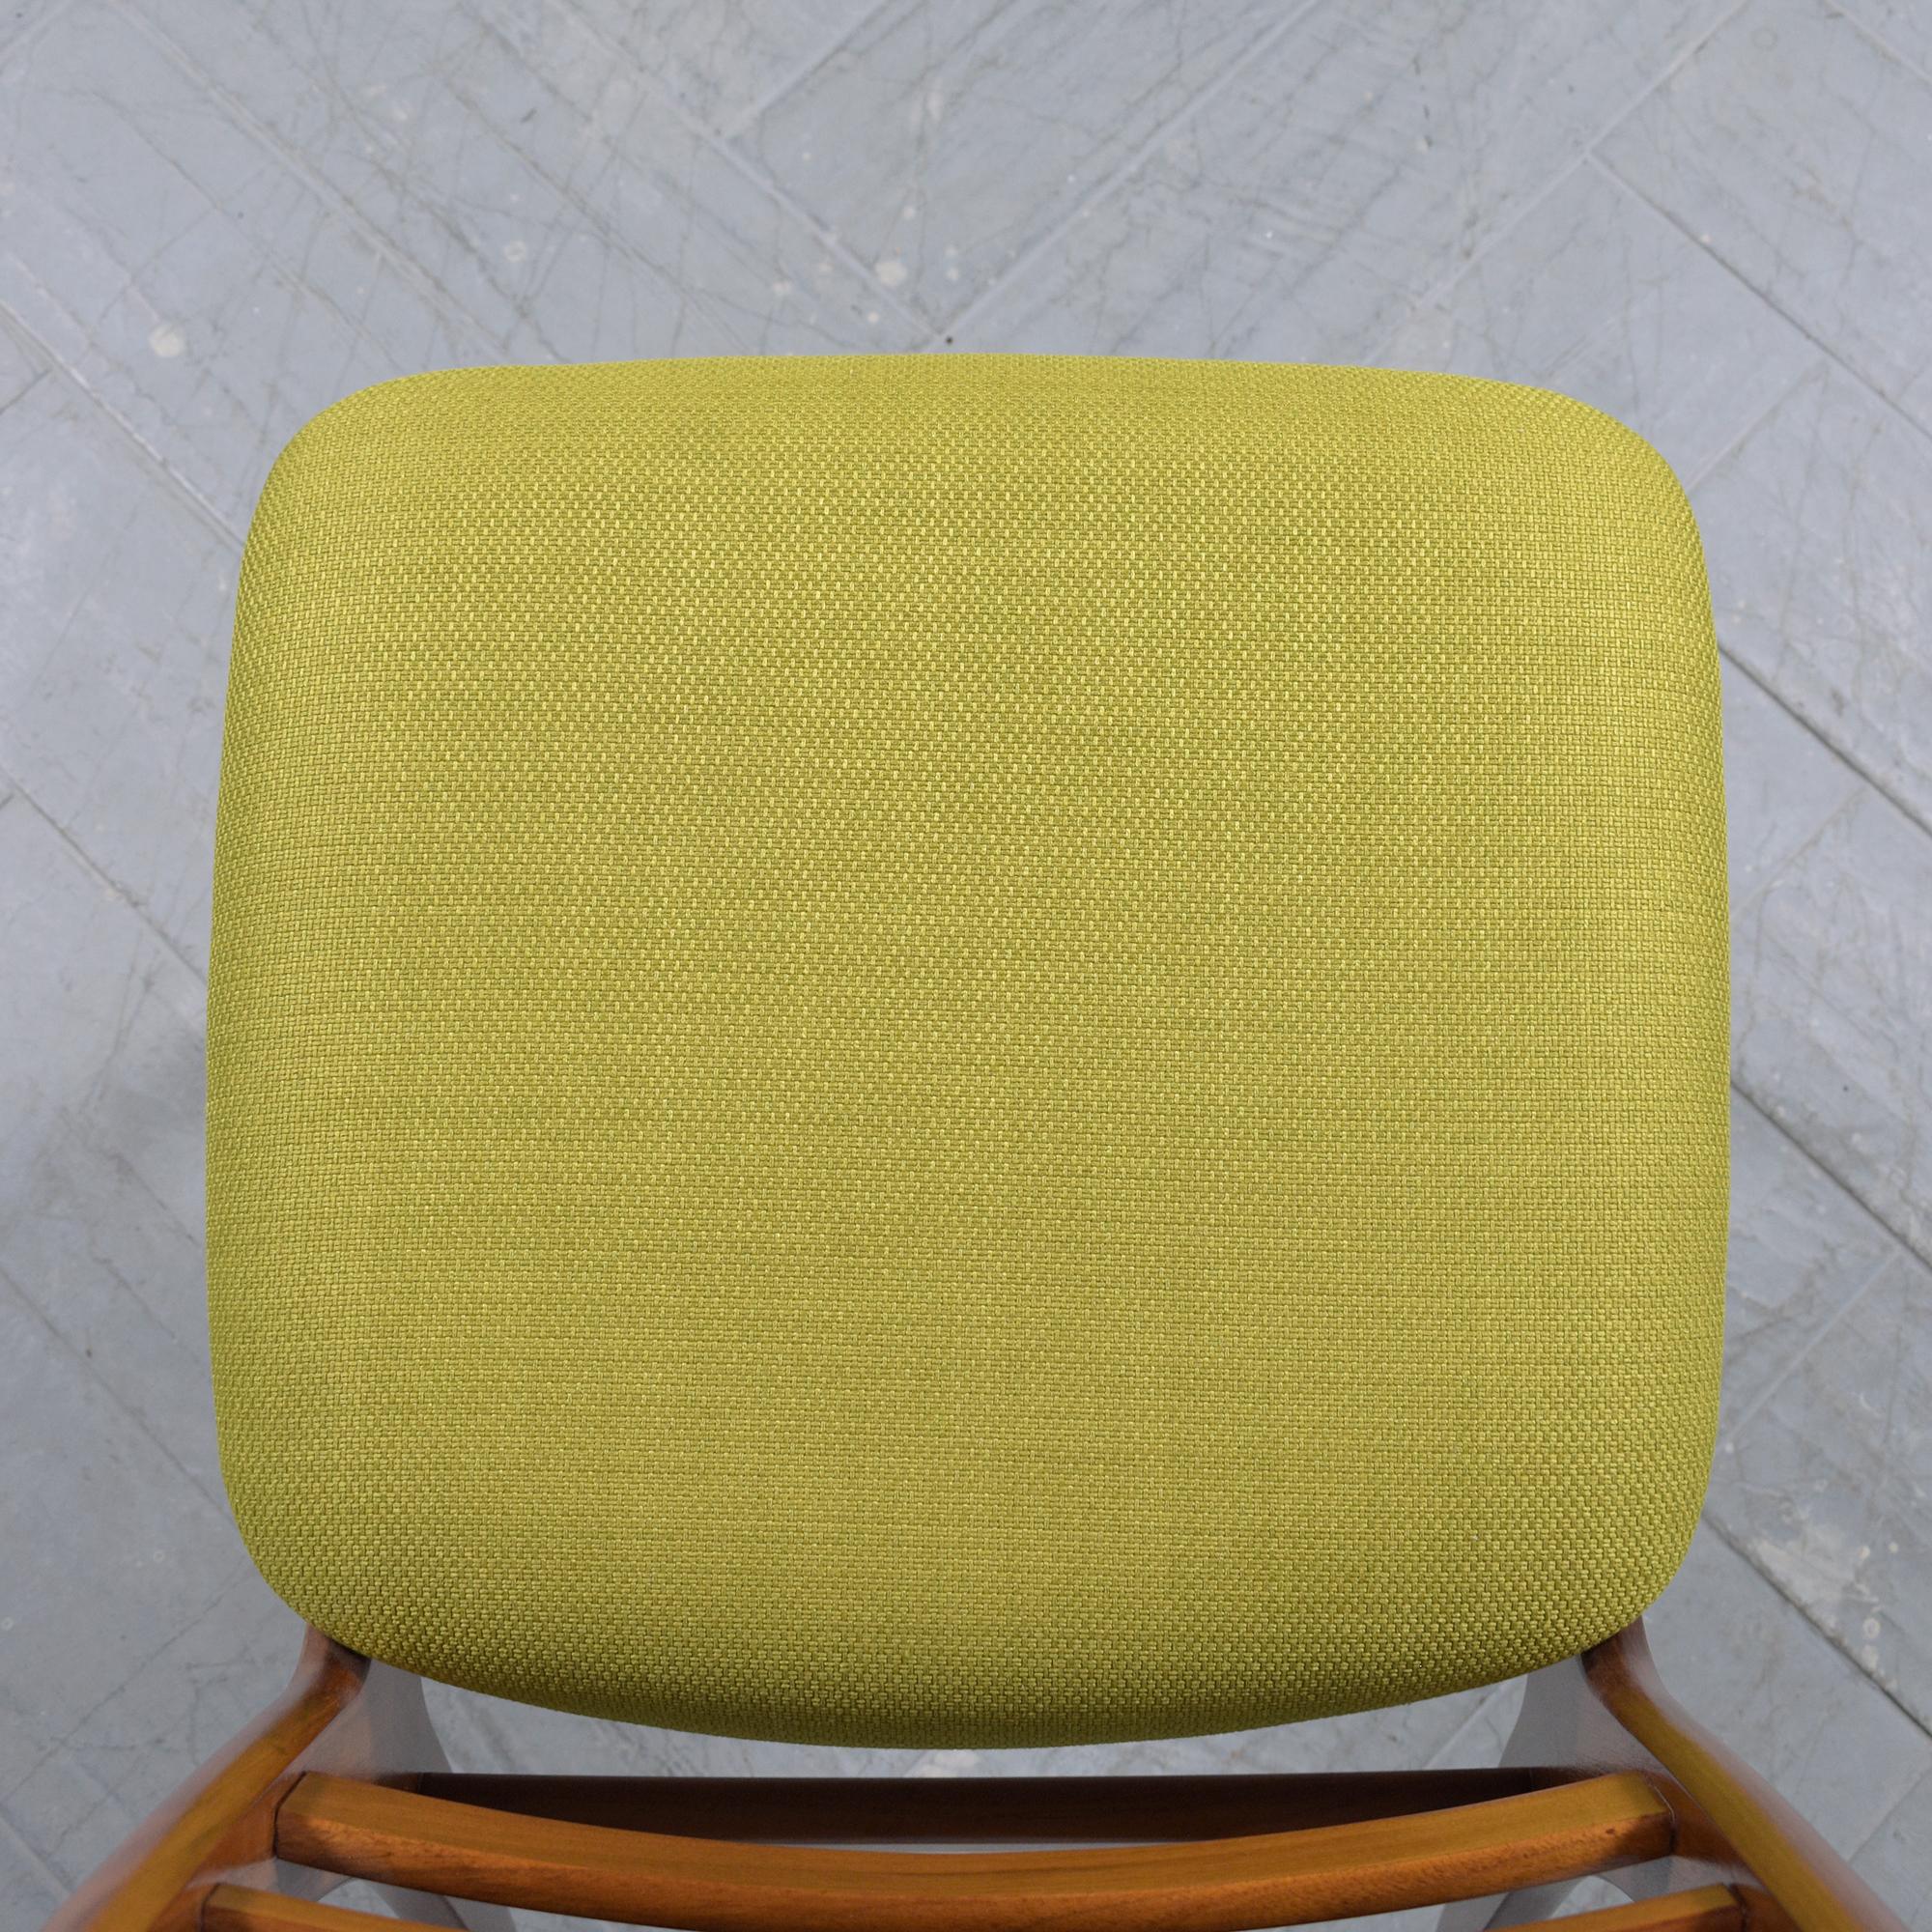 1960s Danish Modern Teak Chair in Walnut Finish with Green Fabric Upholstery For Sale 2